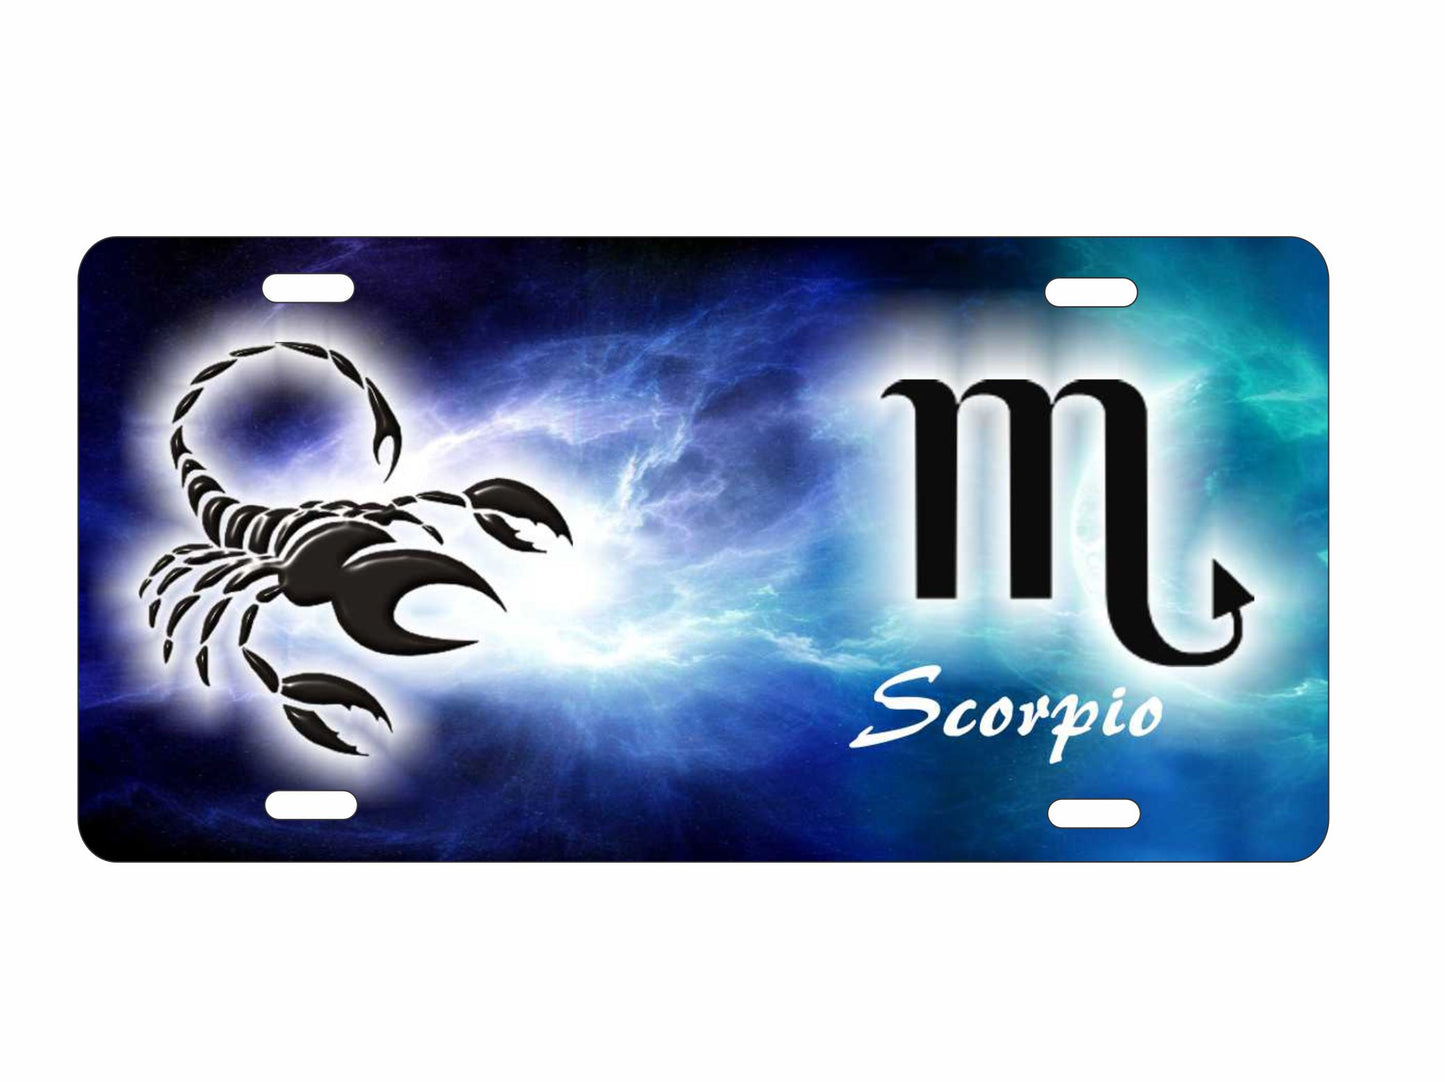 Scorpio zodiac symbol Astrological sign personalized novelty decorative front license plate